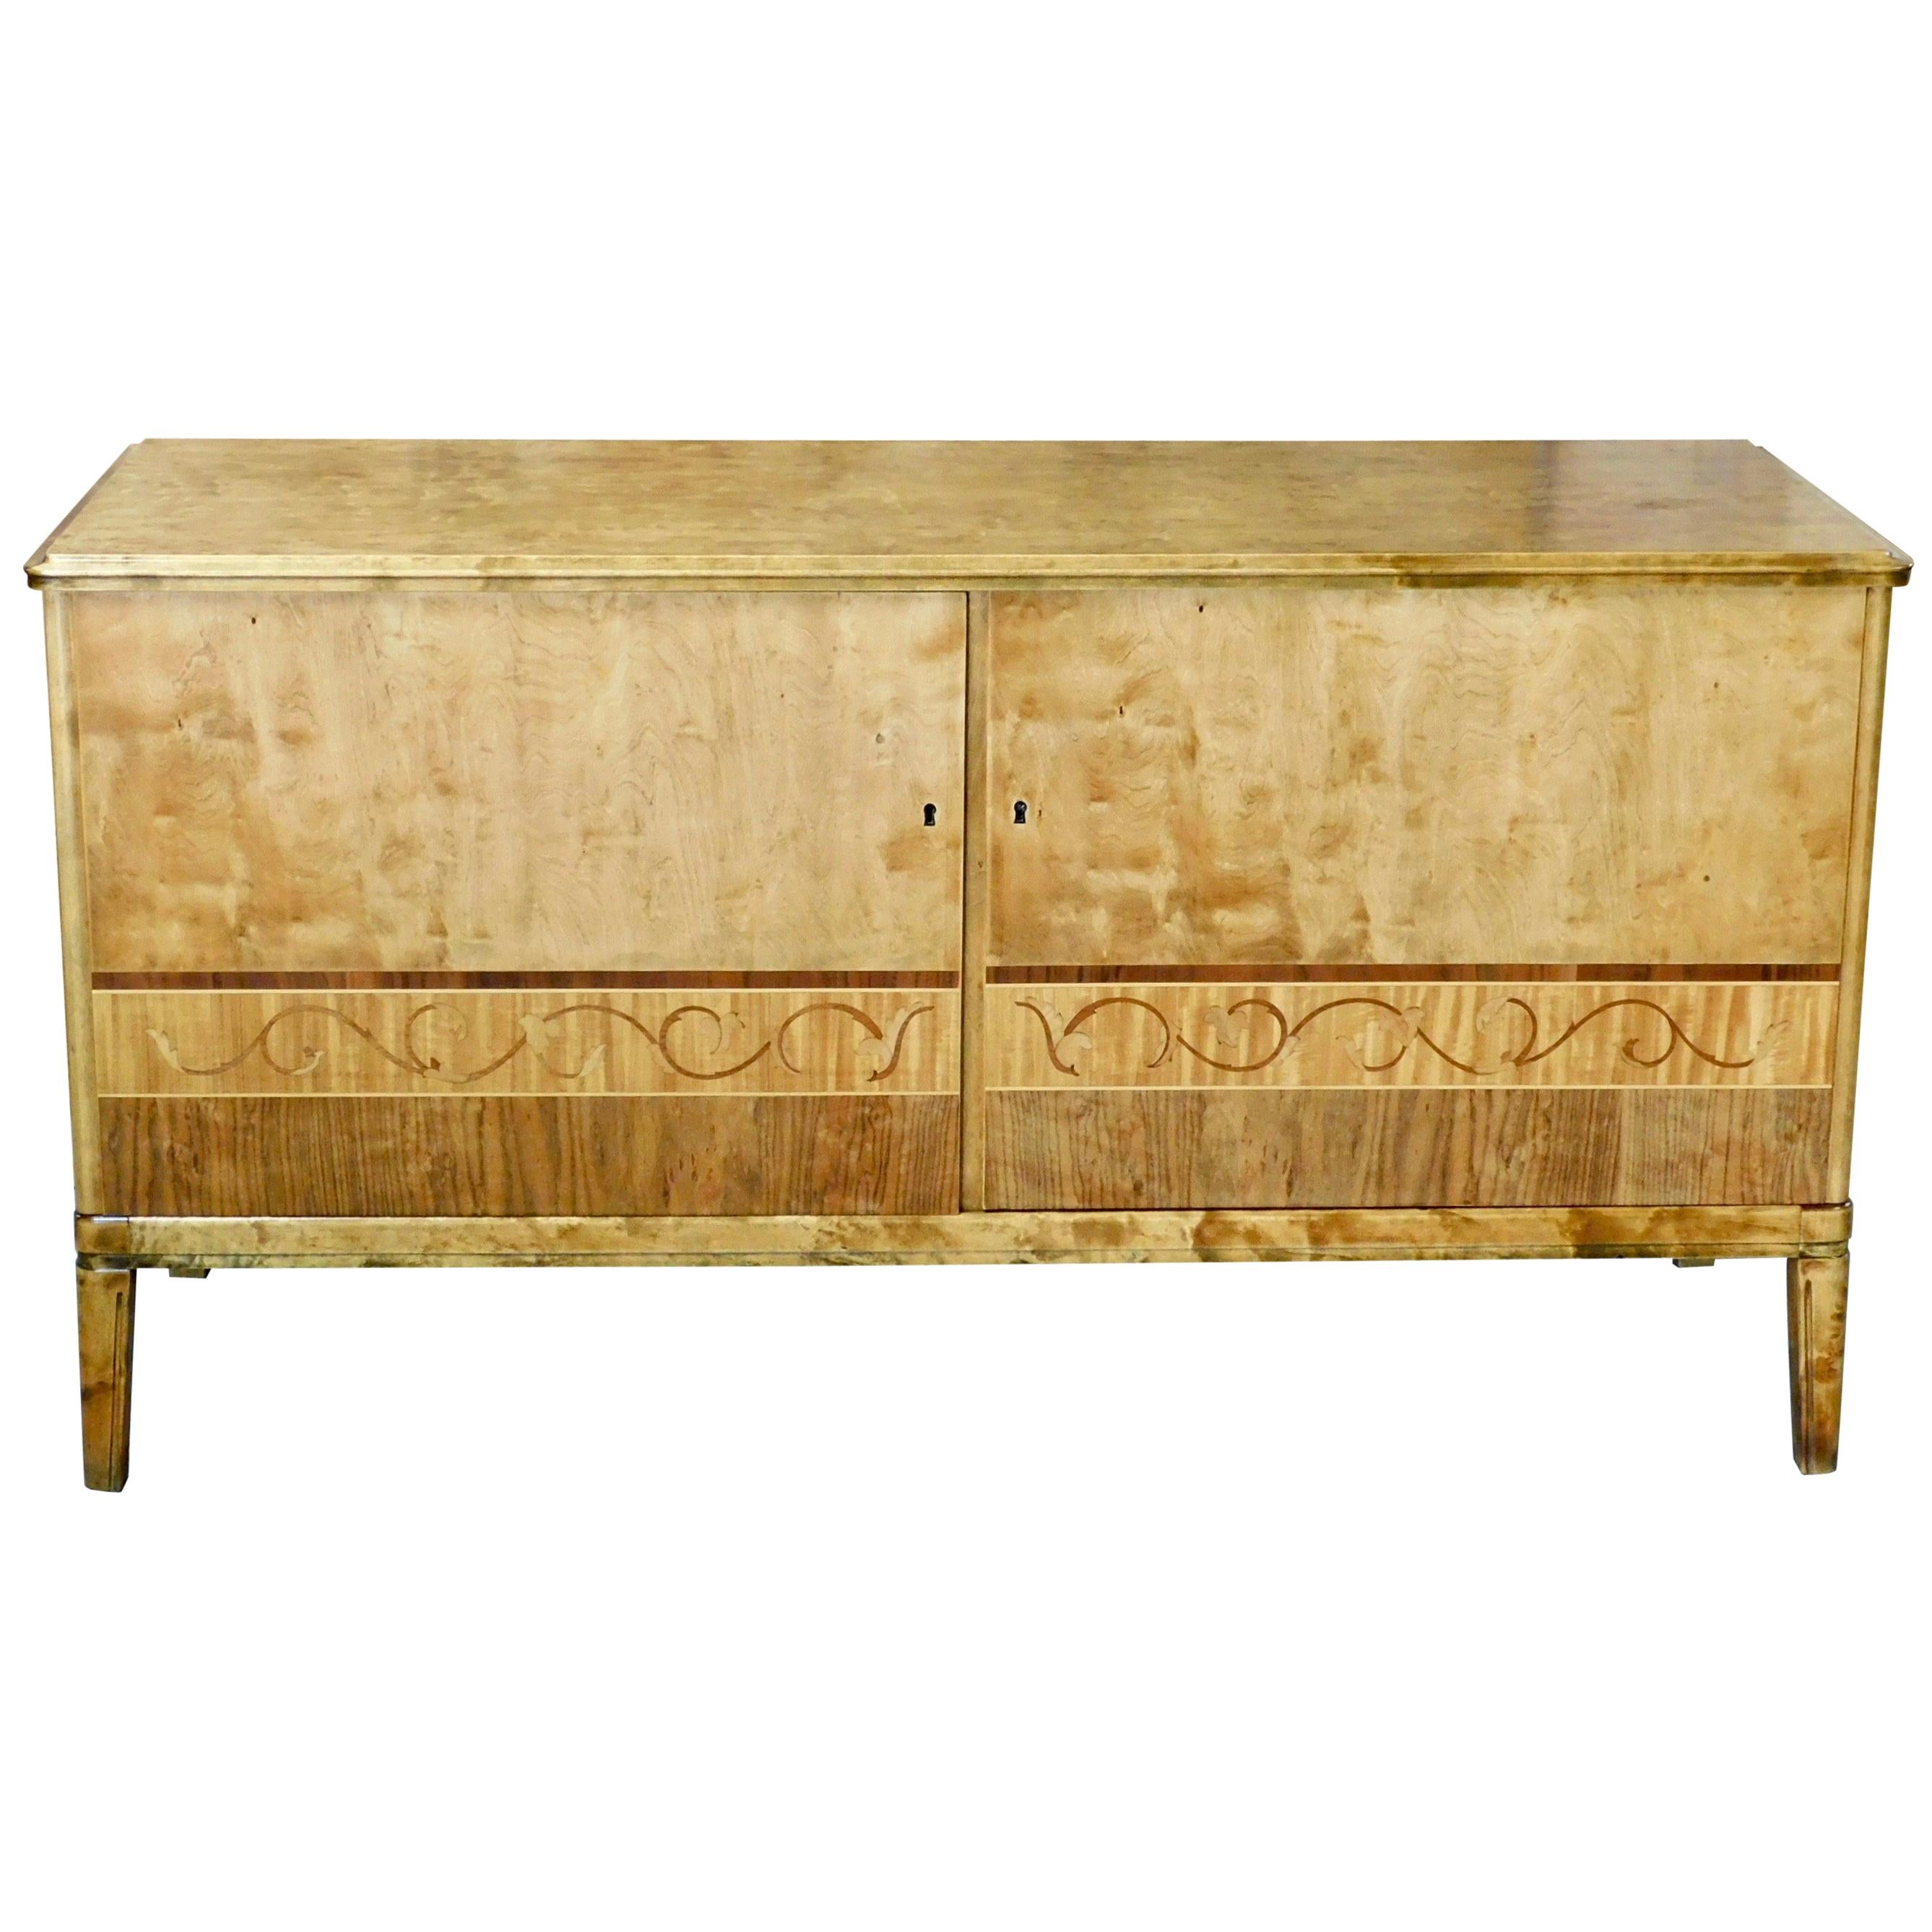 Swedish Art Deco Sideboard Cabinet in Golden Birch with Rosewood Inlay, 1930s For Sale